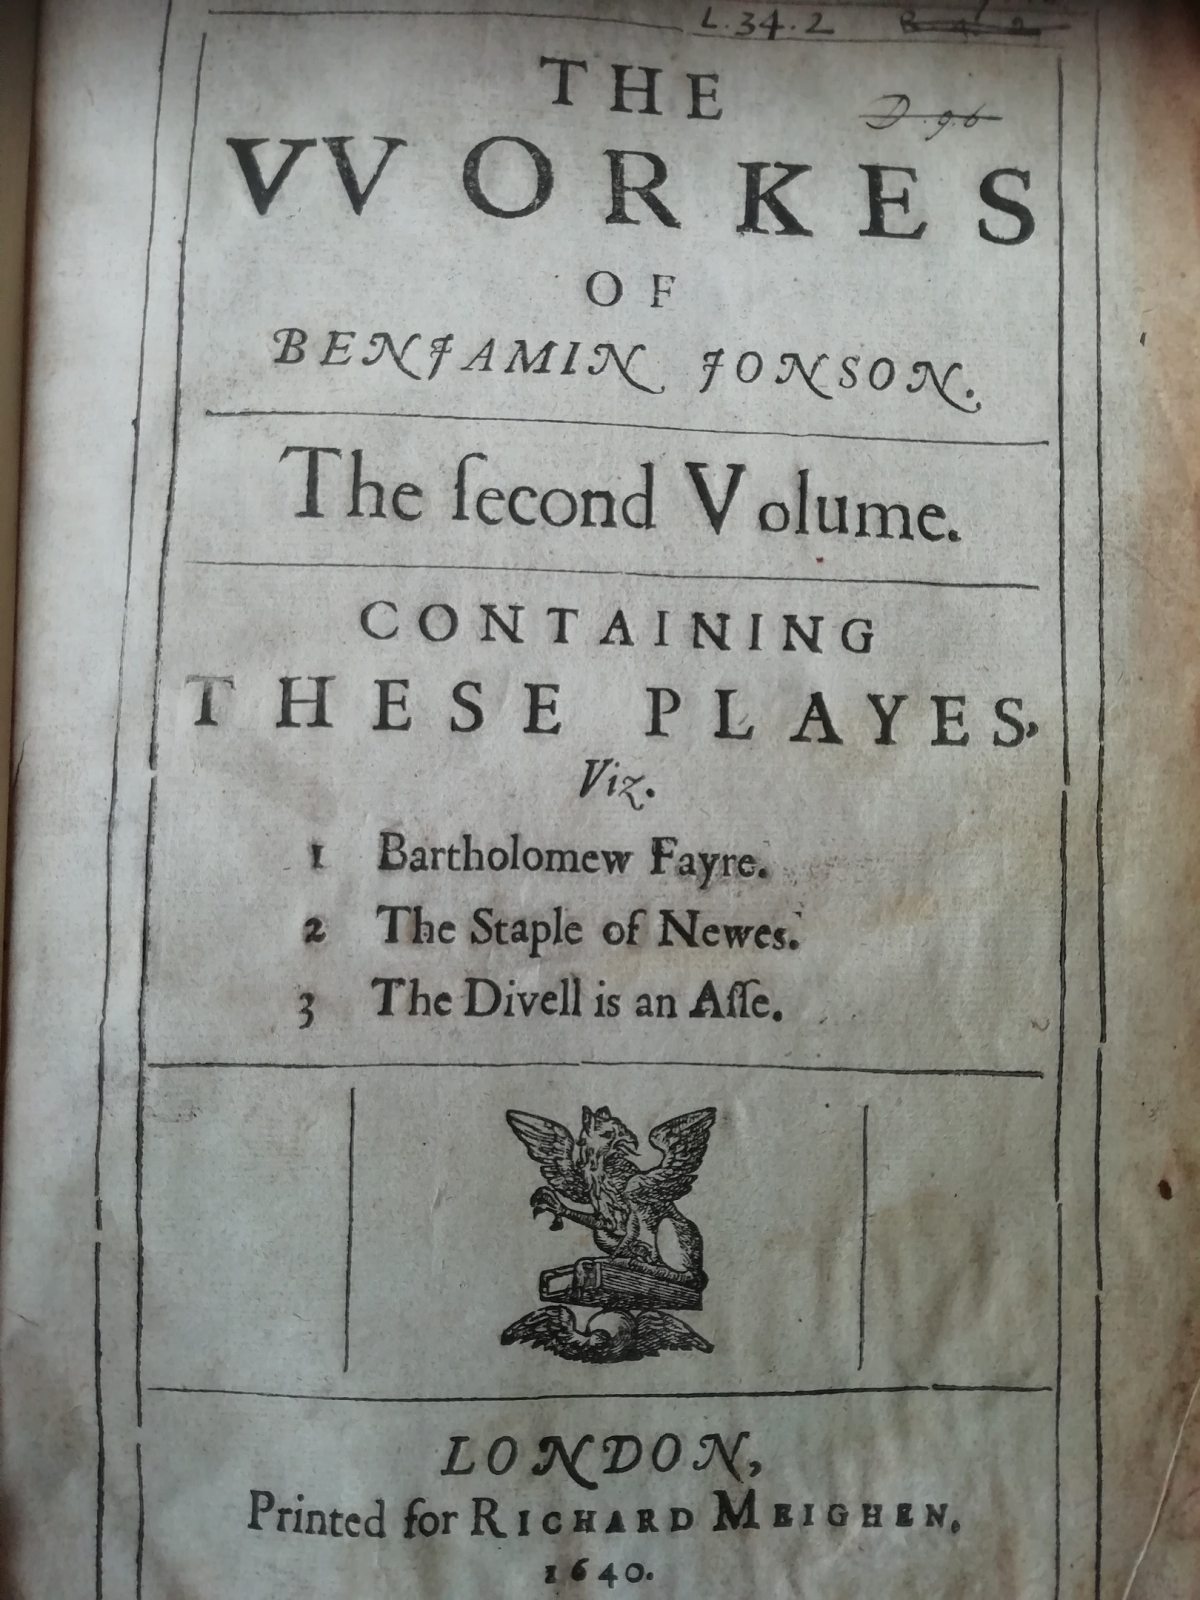 The Workes title page